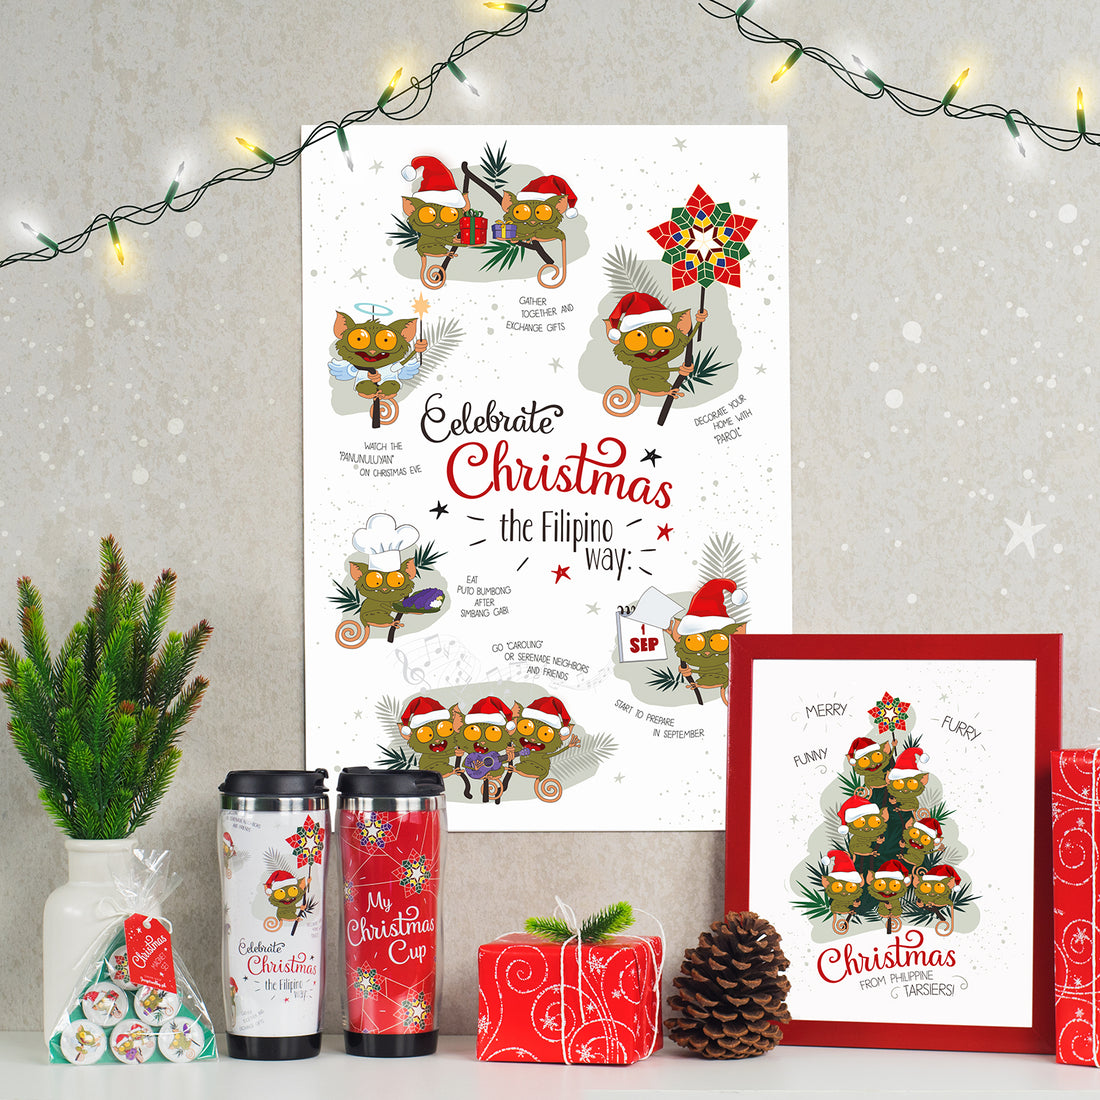 Excellent Decorative and Gift Ideas for the Filipino Christmas